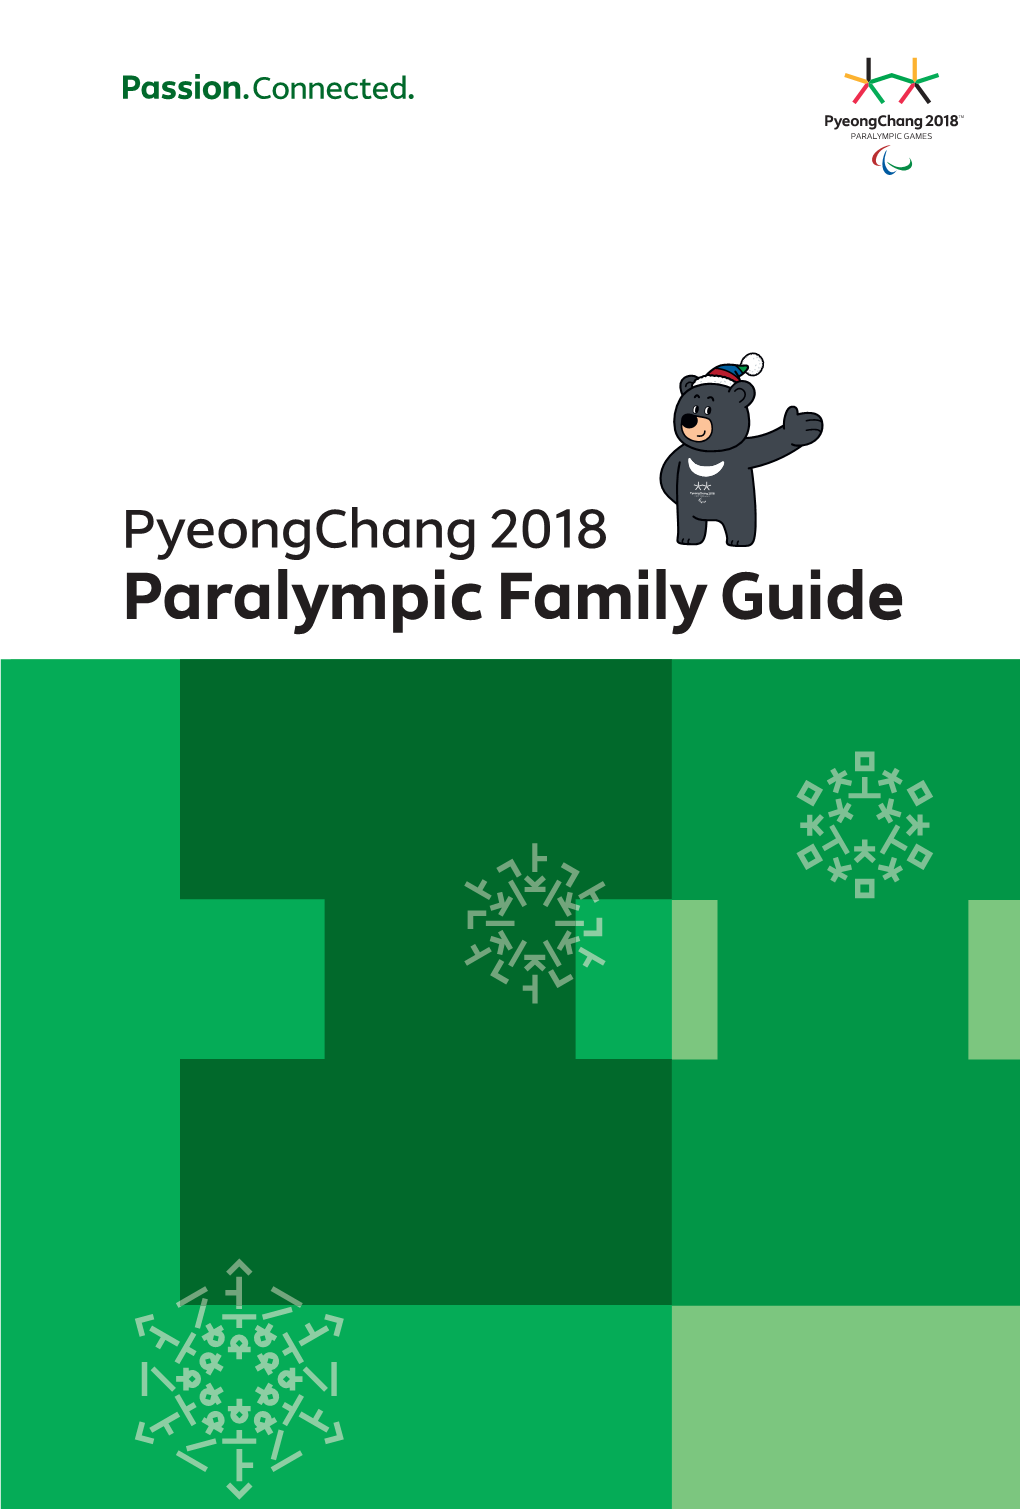 Pyeongchang 2018 Paralympic Family Guide Contents